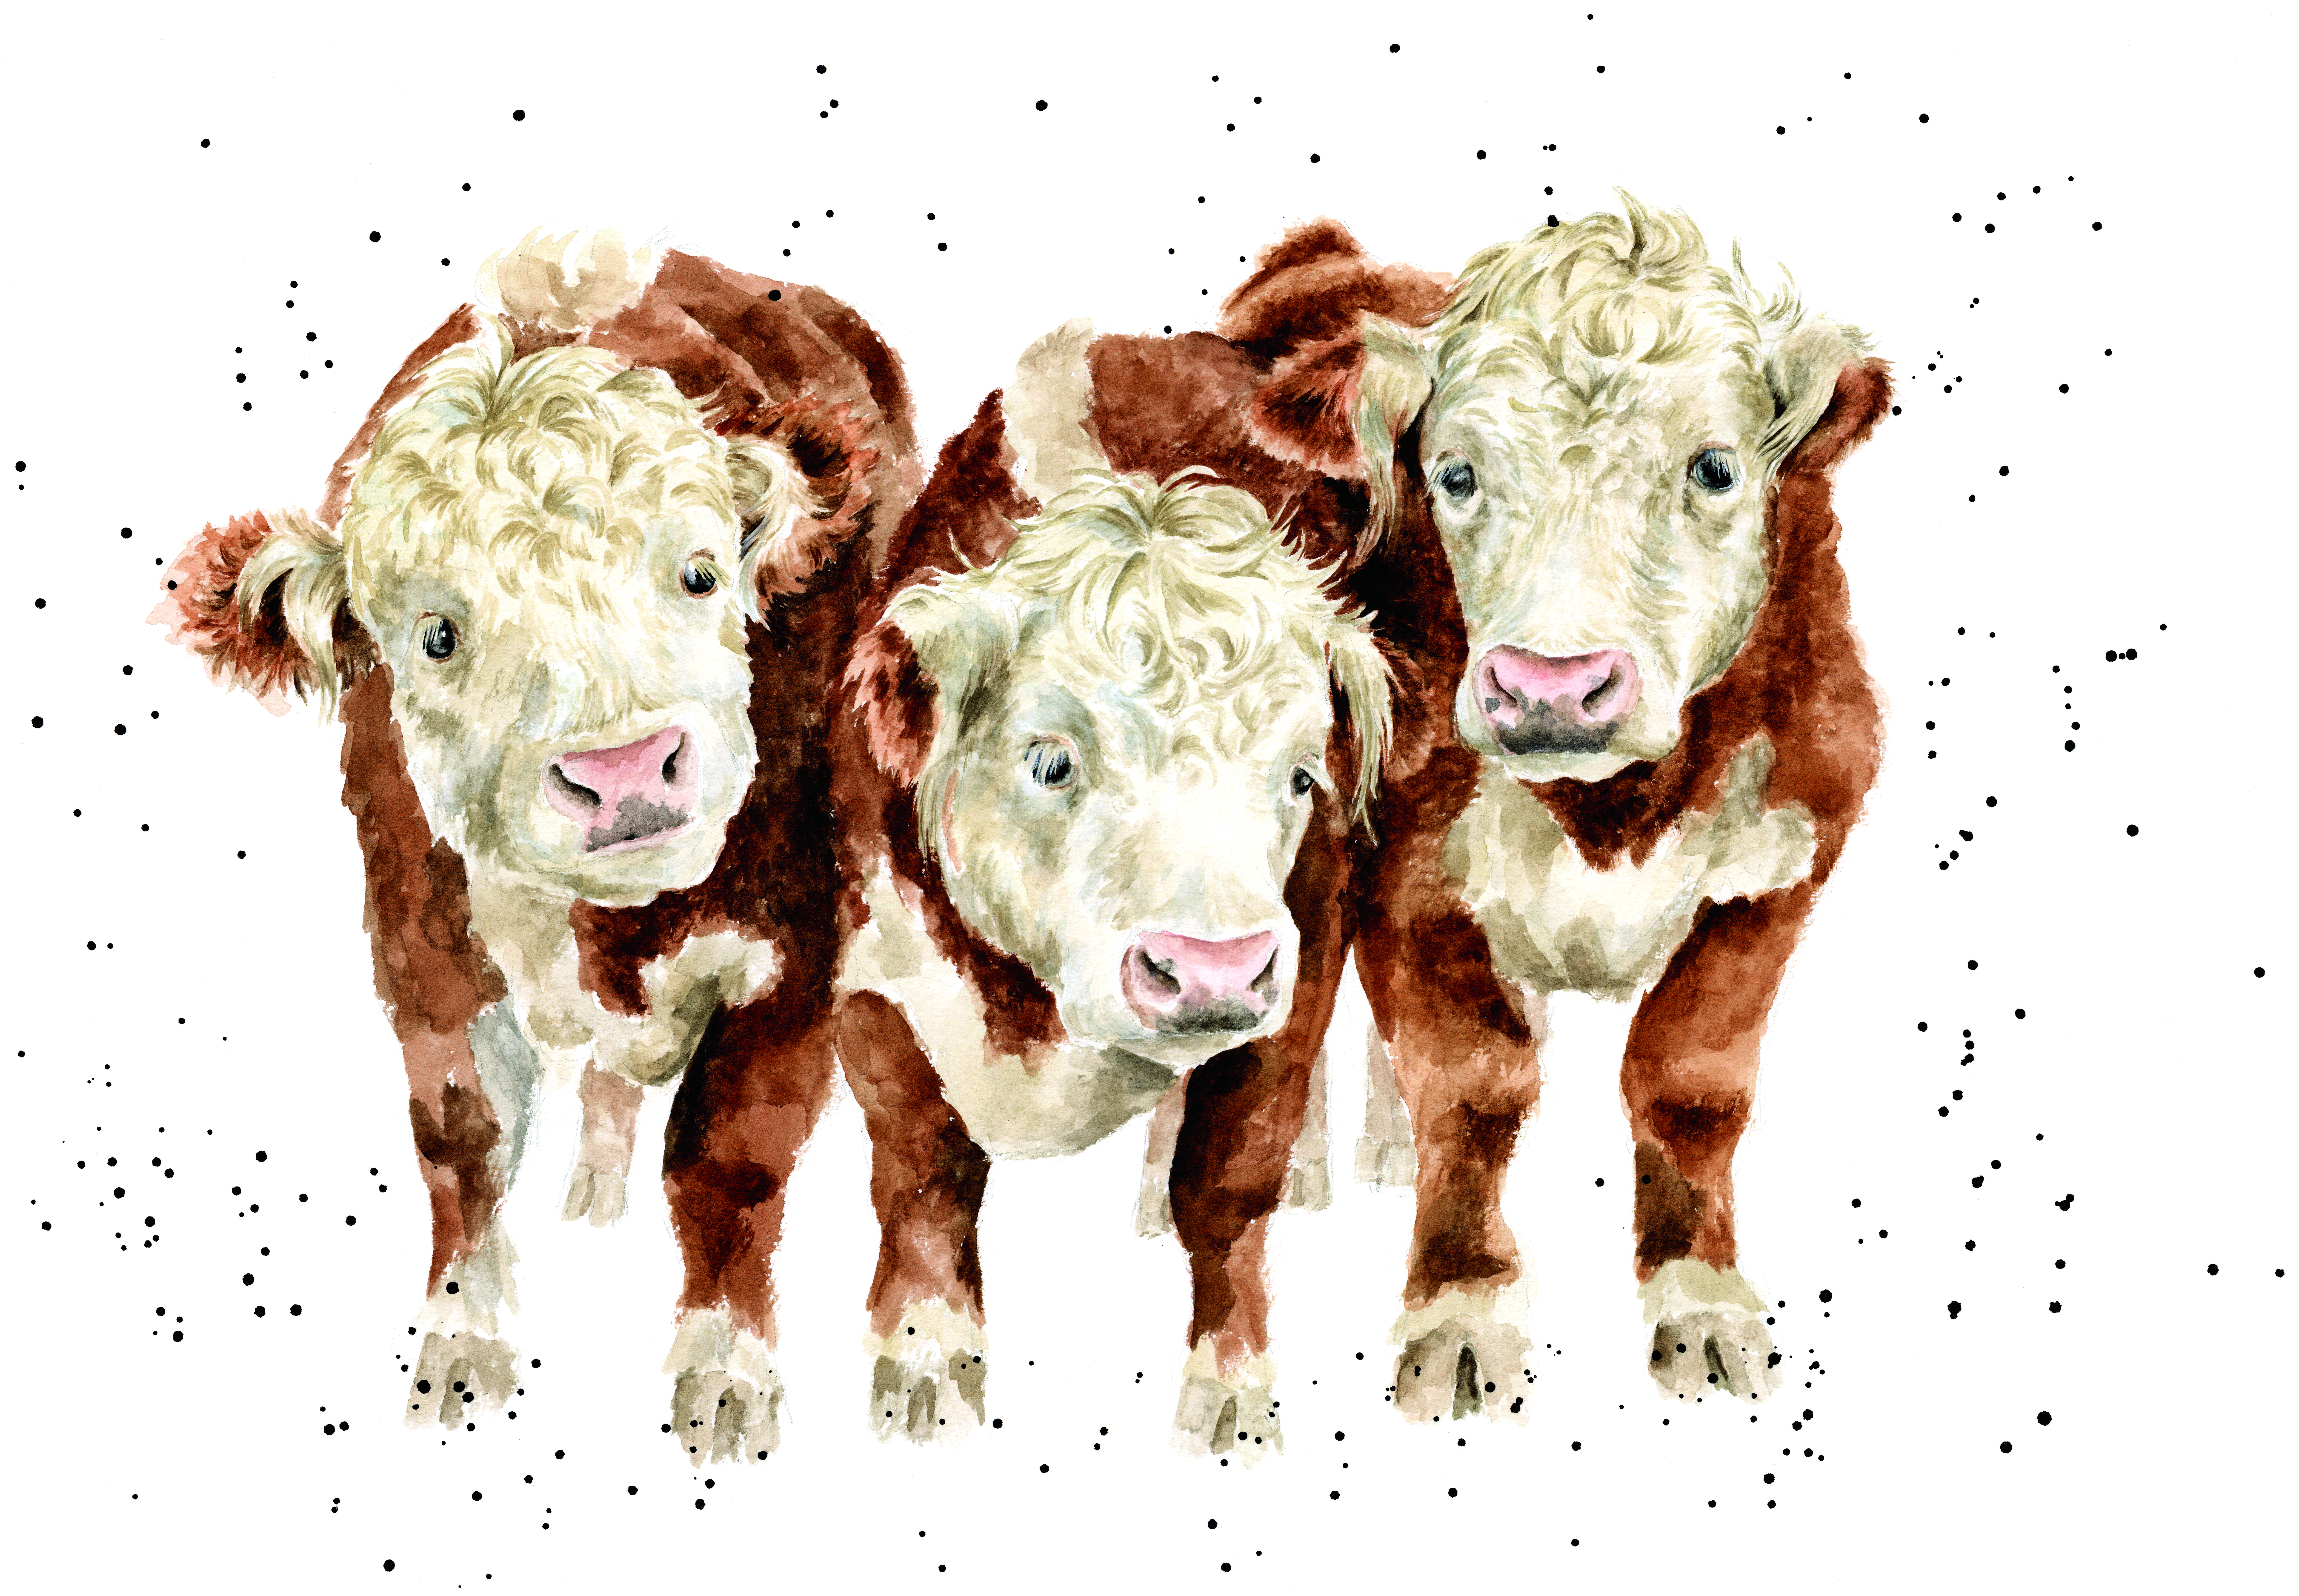 Miniature herefords